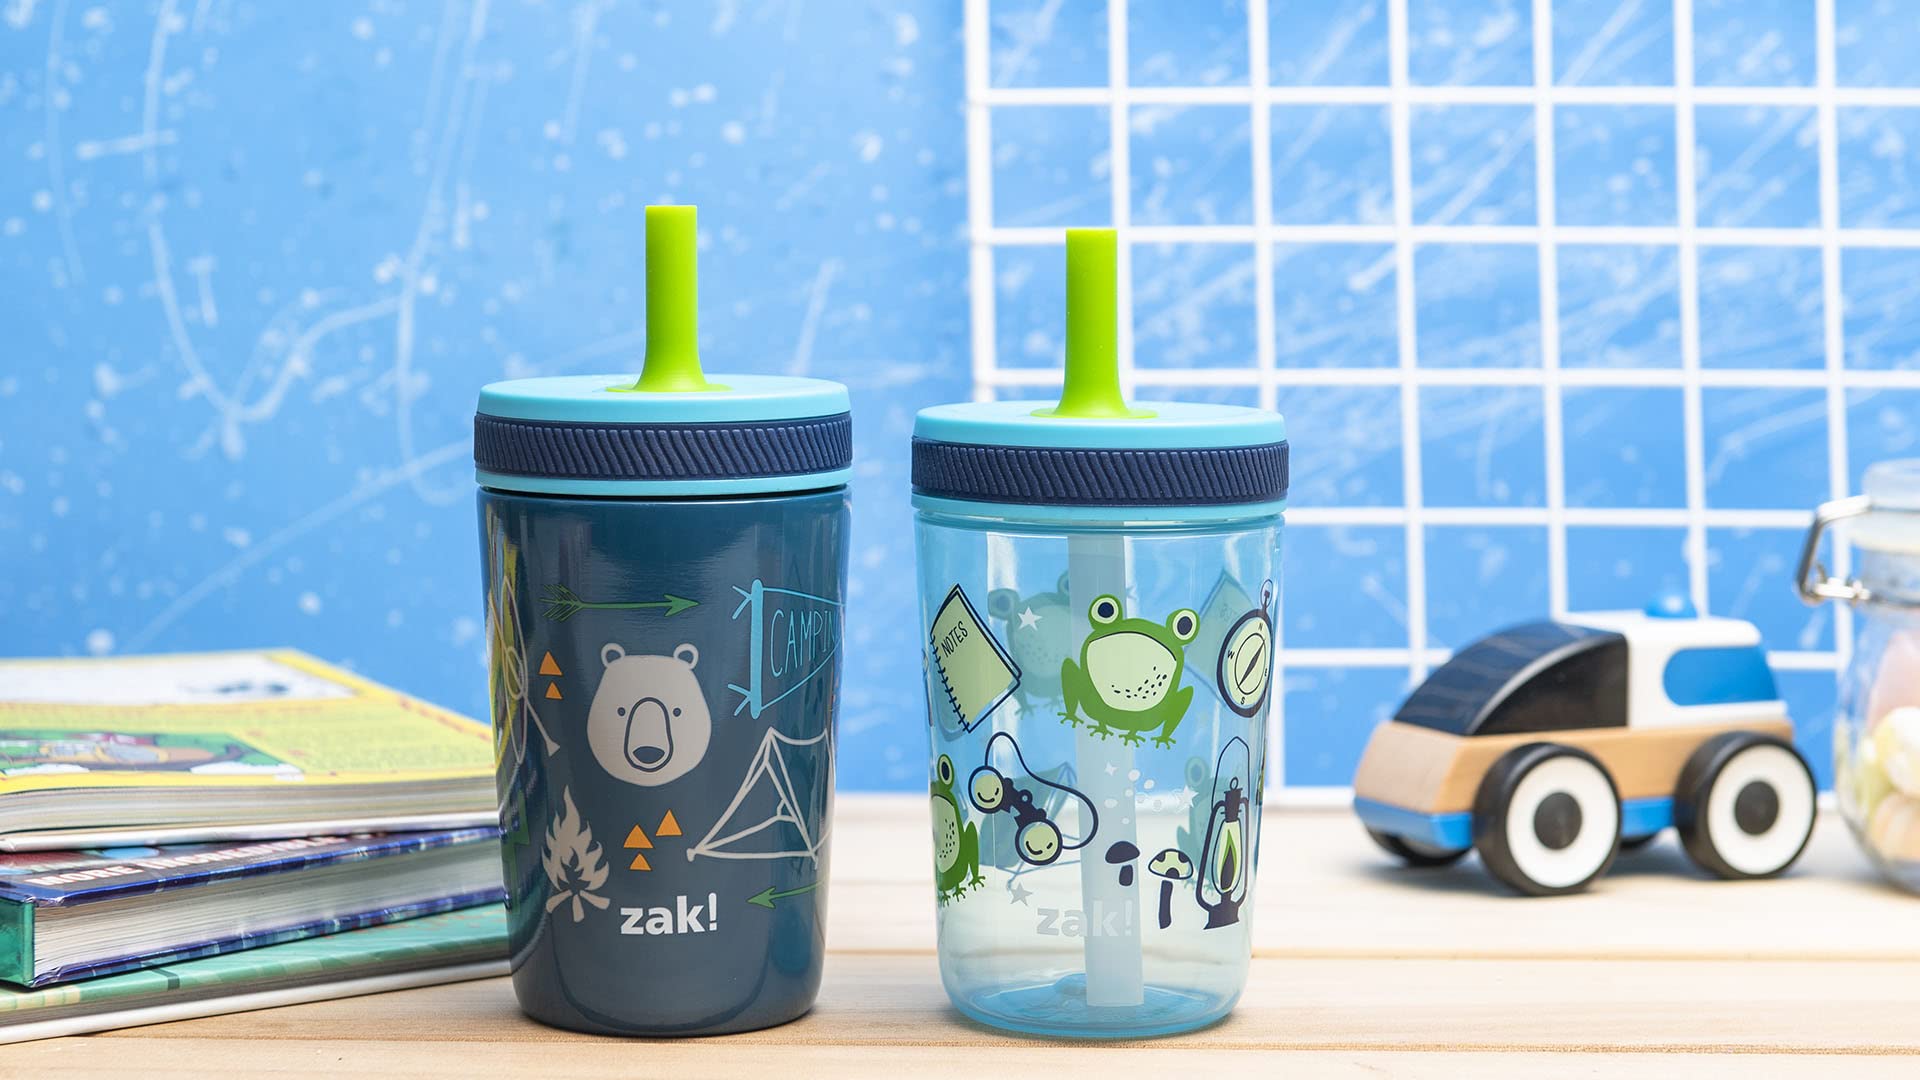 Zak Designs Campout and Camping Kelso Tumbler Set, Leak-Proof Screw-On Lid with Straw, Bundle for Kids Includes Plastic and Stainless Steel Cups with Bonus Sipper, 3pc Set, Non-BPA,15 fl oz